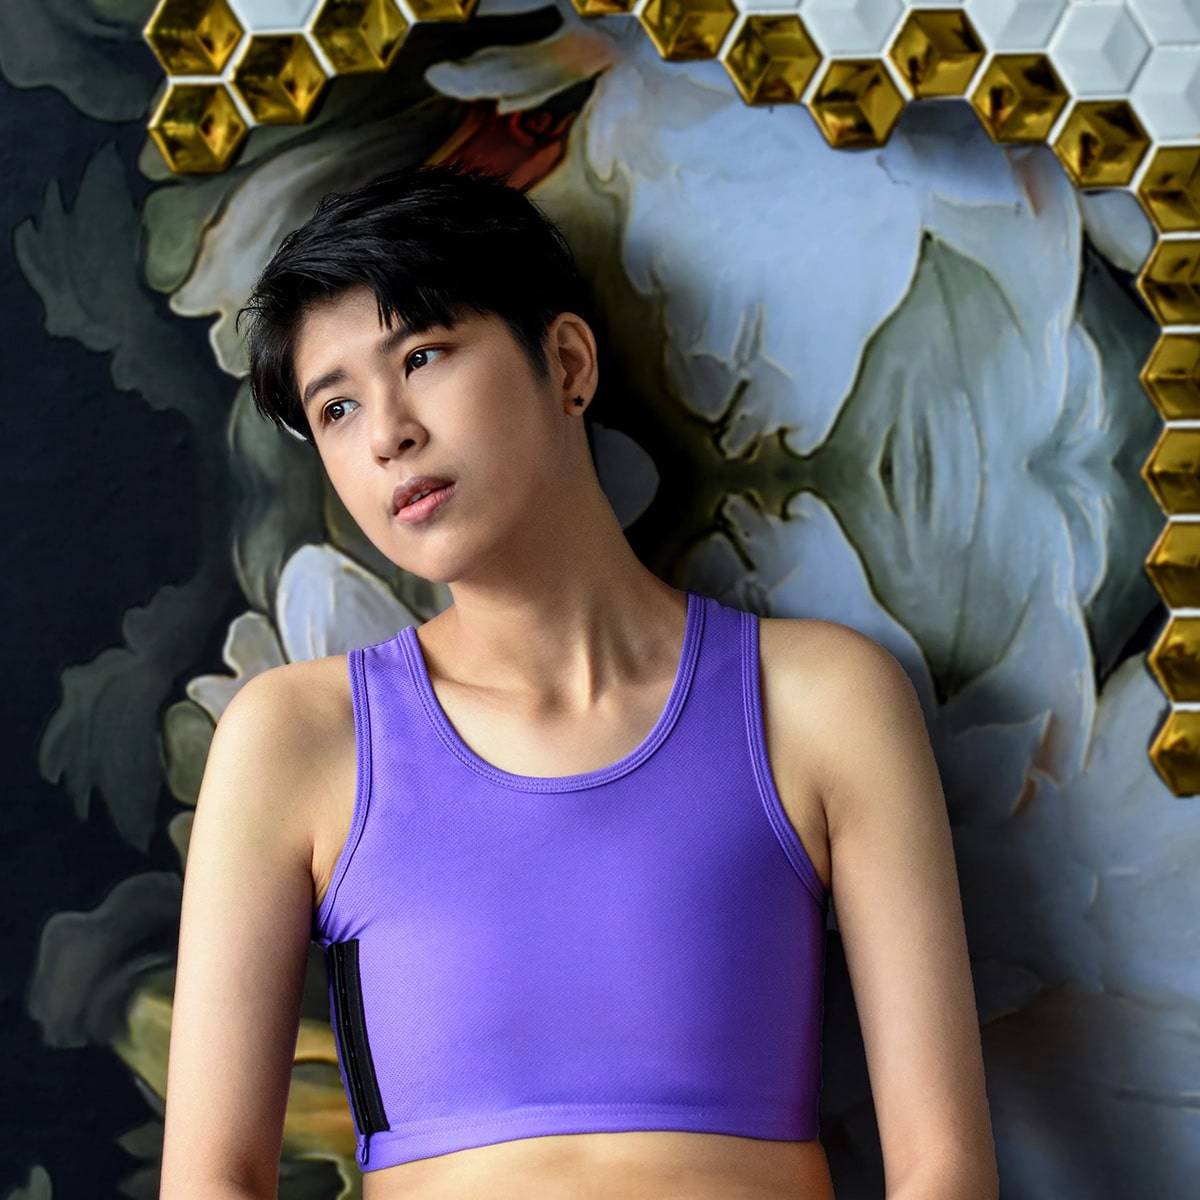 Non-binary androgynous tomboy transman lesbian wearing a TOMSCOUT lavender purple Chest Binder, embracing the triumph over body dysphoria and experiencing gender euphoria with a flattened chest. Featured in the TOMSCOUT Free Chest Binder Program, The Freedom Binder.